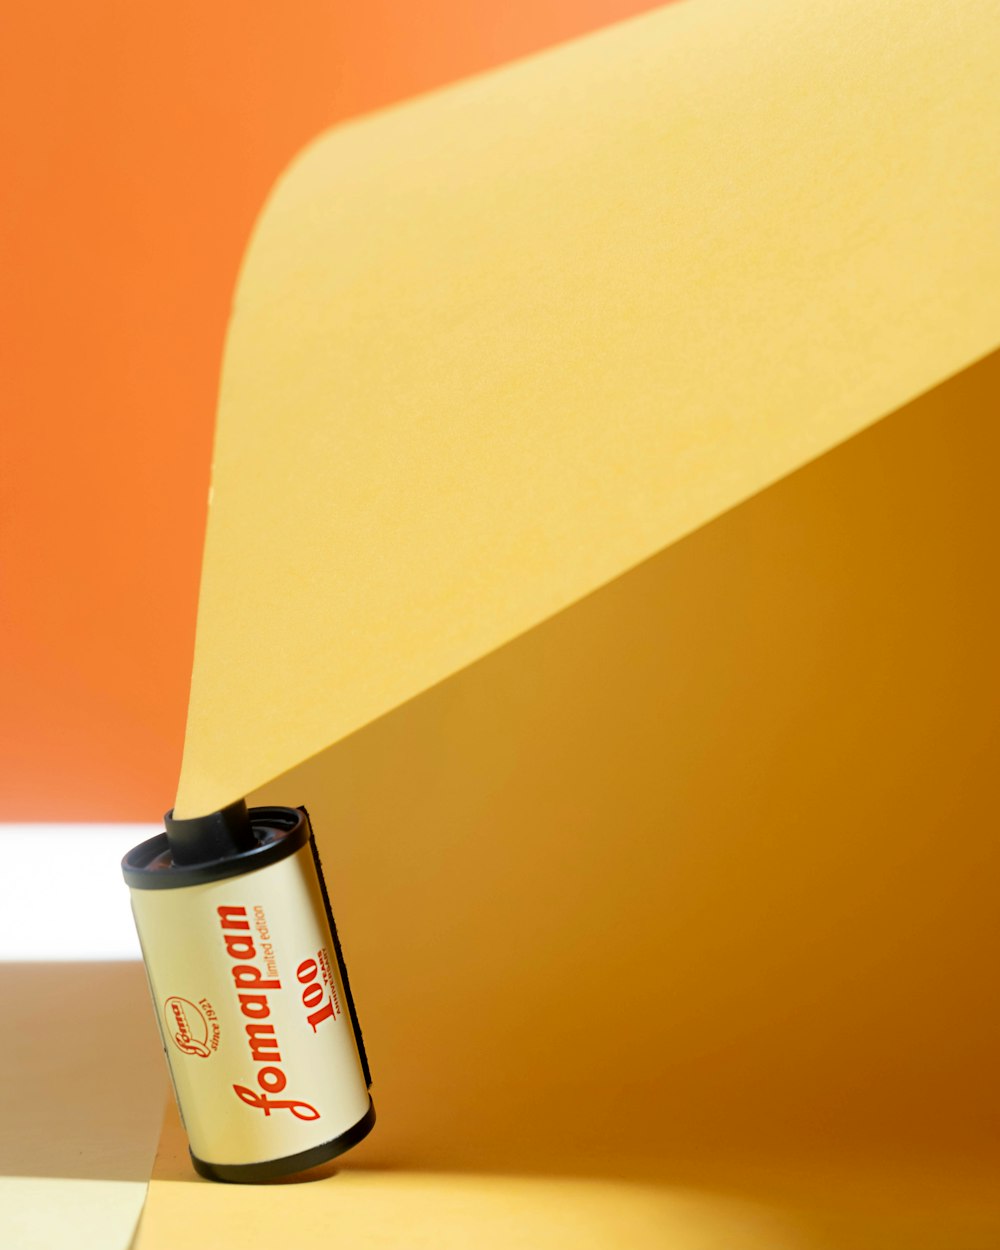 a can of soda sitting on top of a yellow piece of paper